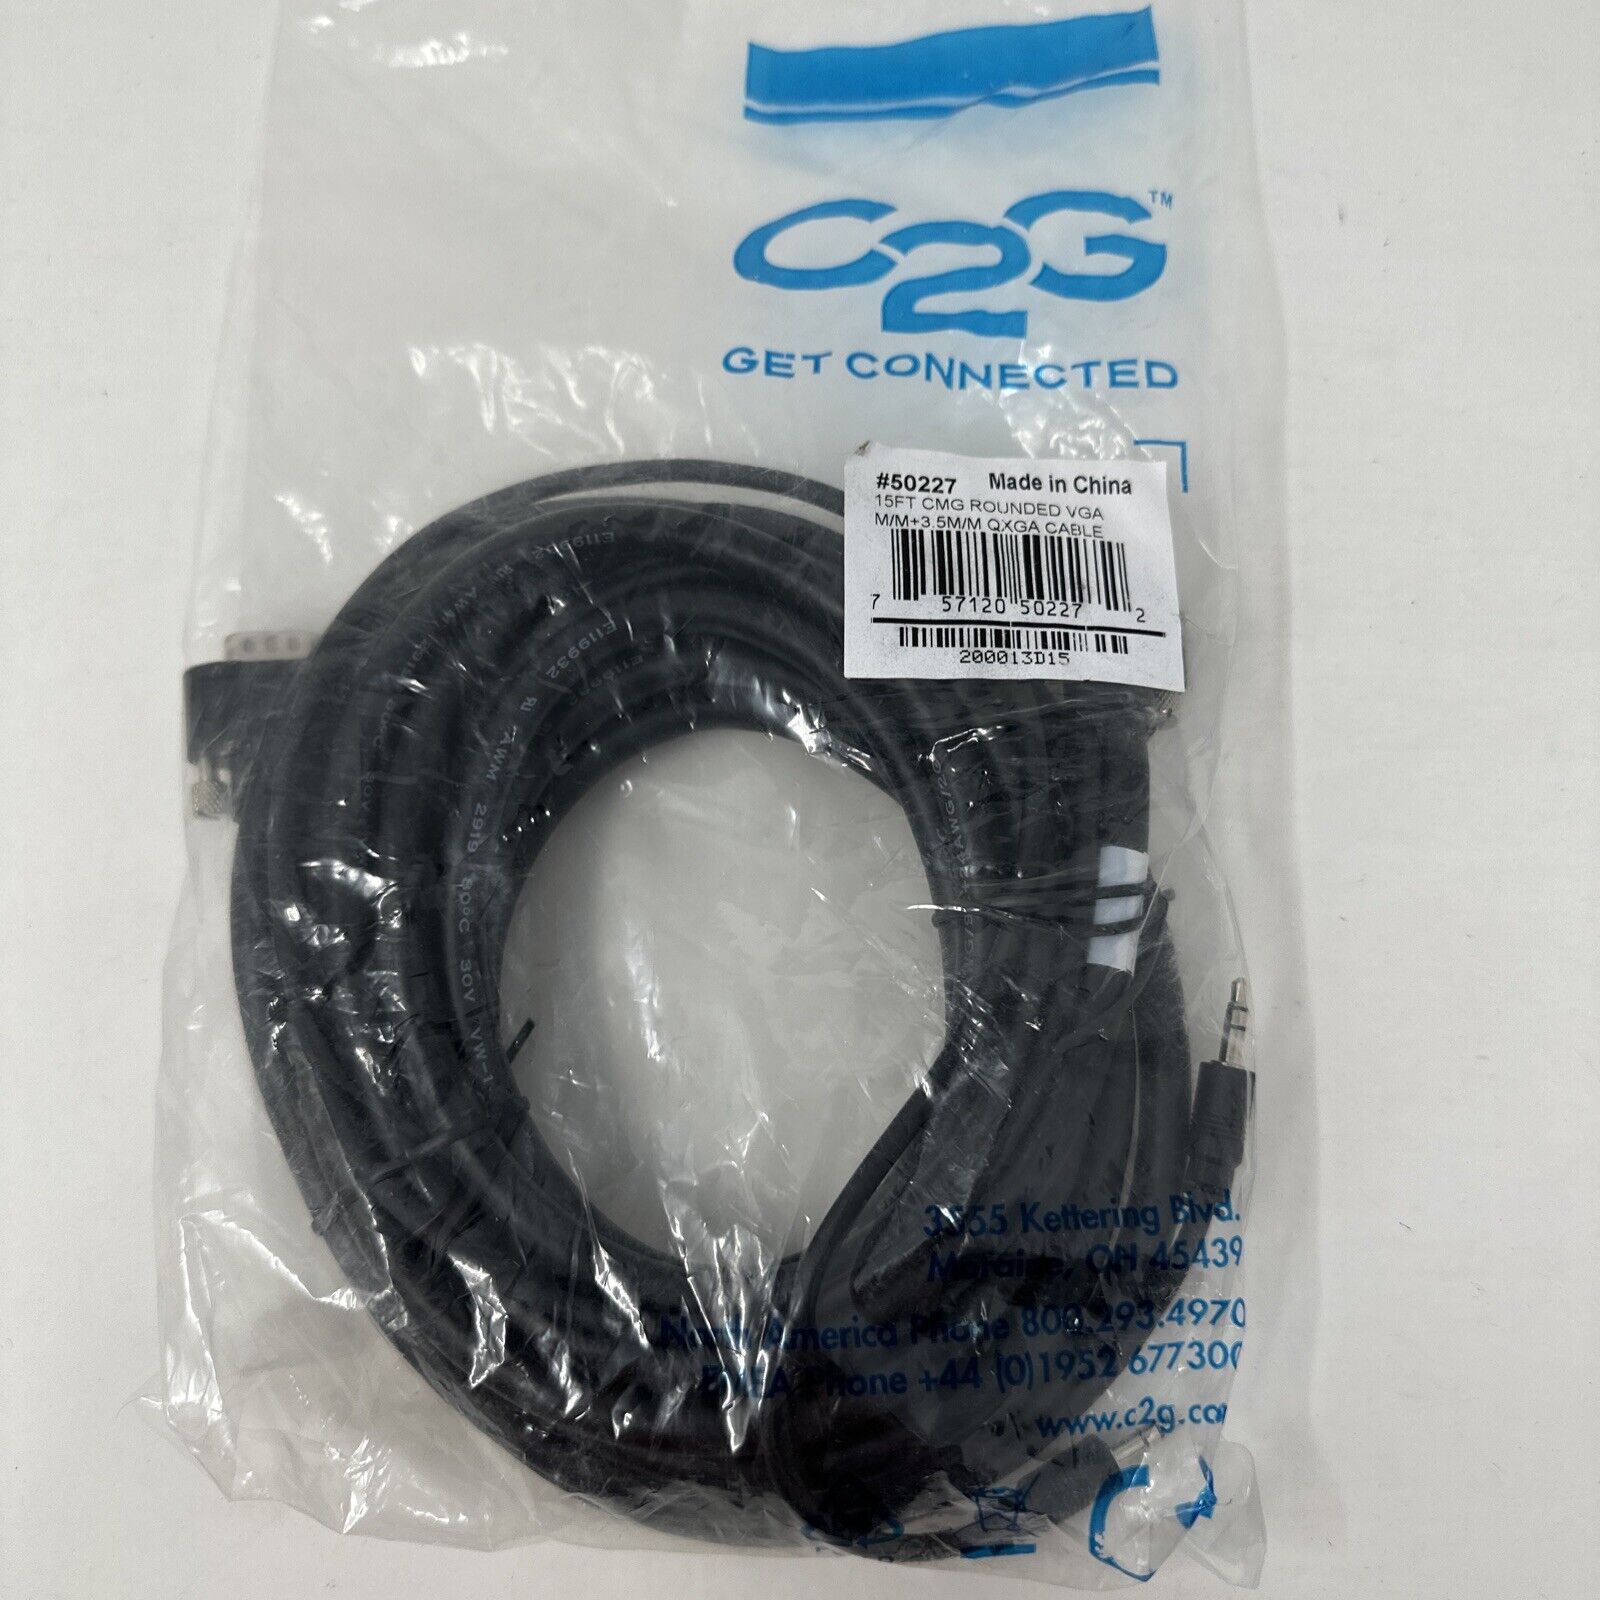 VGA+3.5mm Cable VGA to VGA Cord 3.5mm Audio M/M 15ft New in original packaging